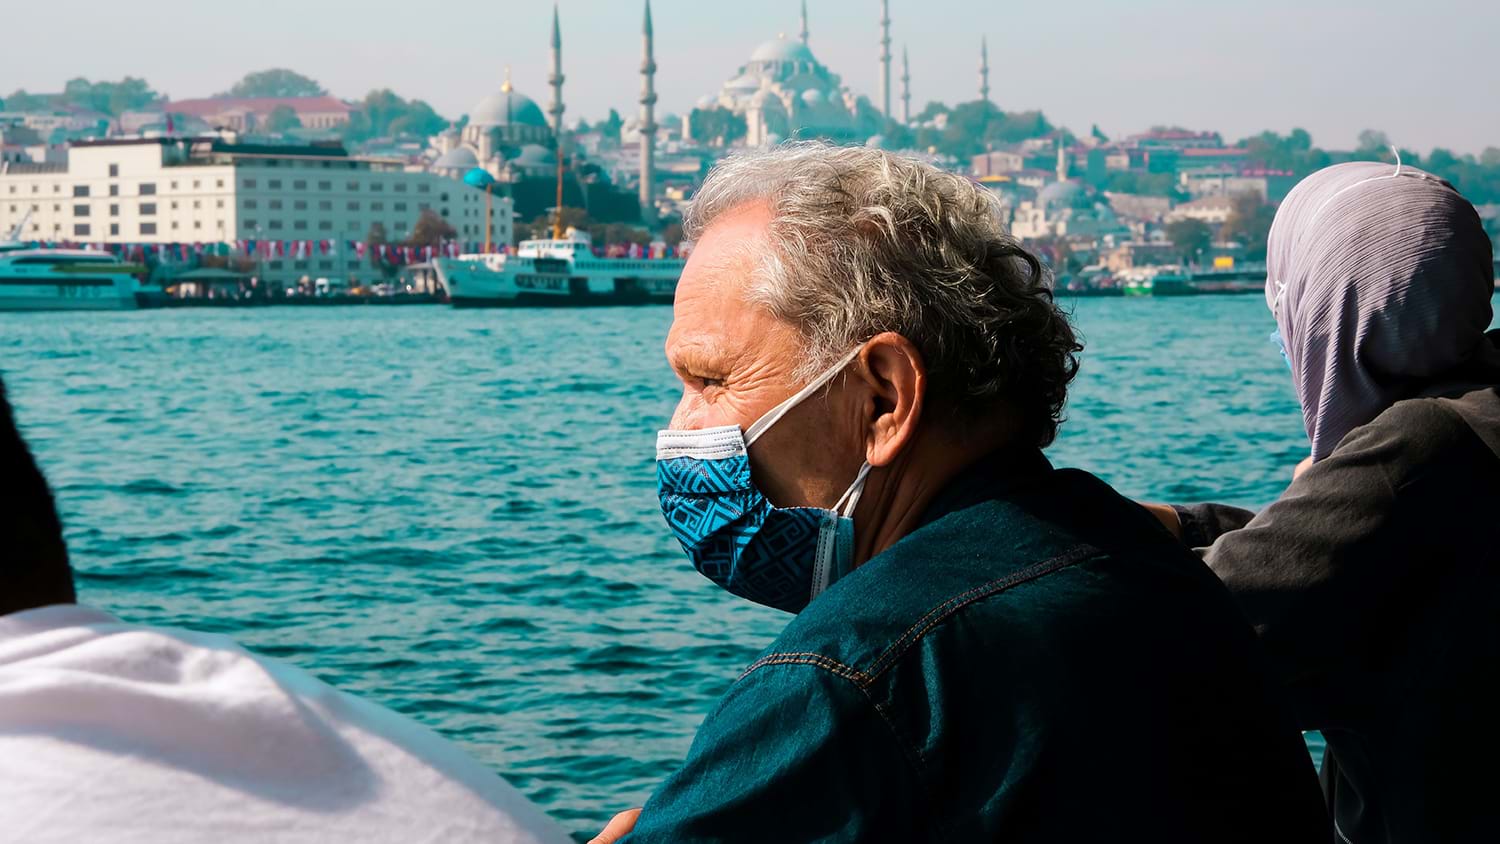 People on boat in Istanbul